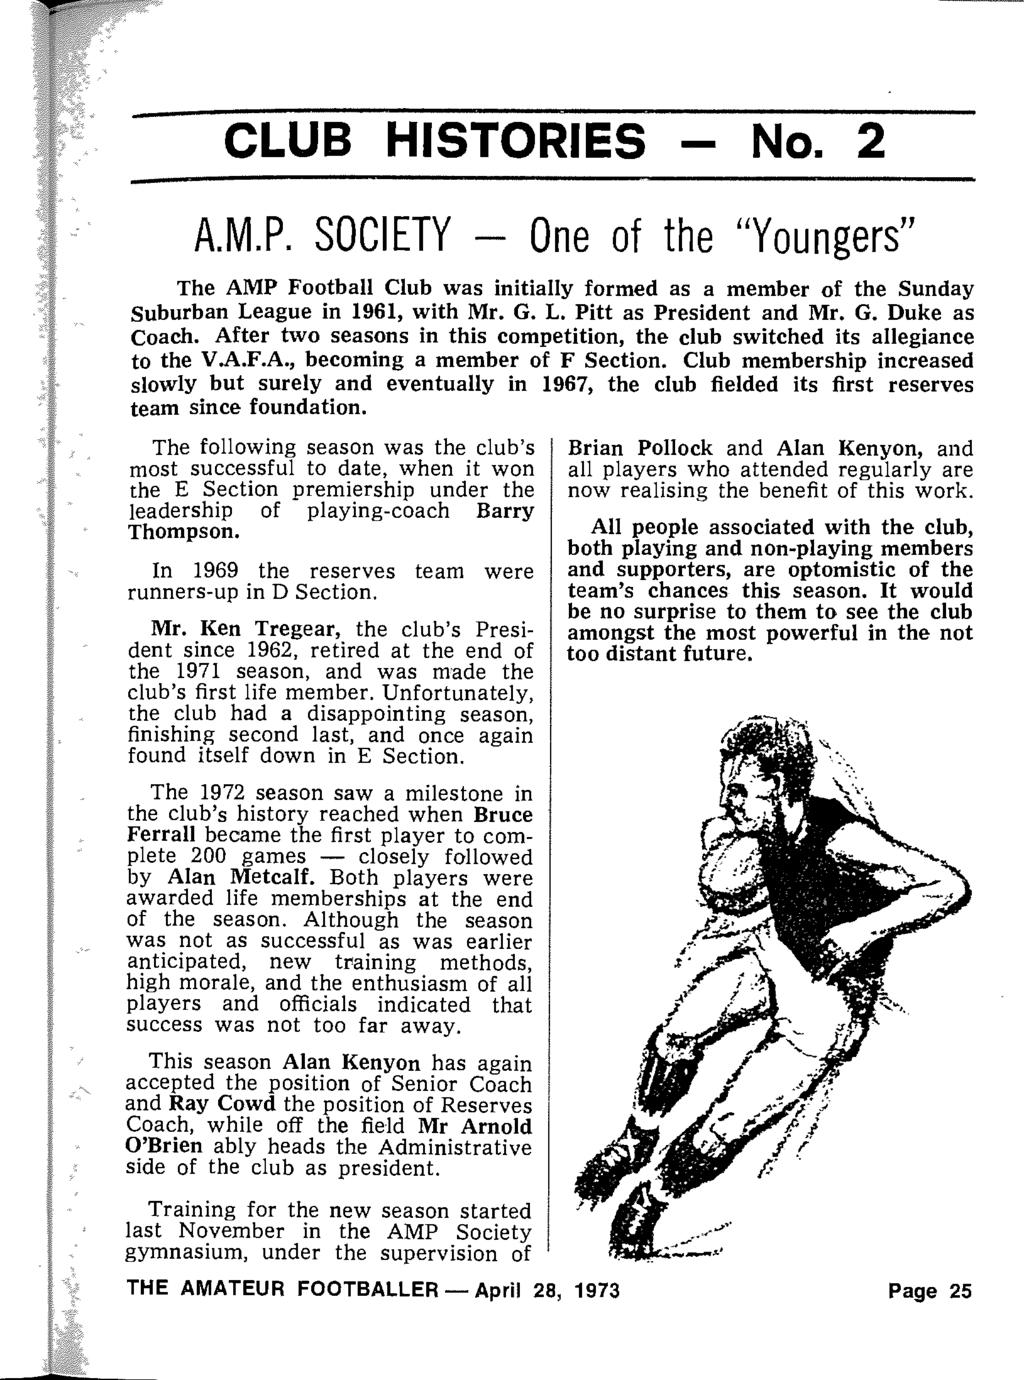 CLUB HISTORIES - No. 2 A.M.P. SOCIETY - One of the "Youngers " The AMP Football Club was initially formed as a member of the Sunday Suburban League in 1961, with Mr. G. L. Pitt as President and Mr. G. Duke as Coach.